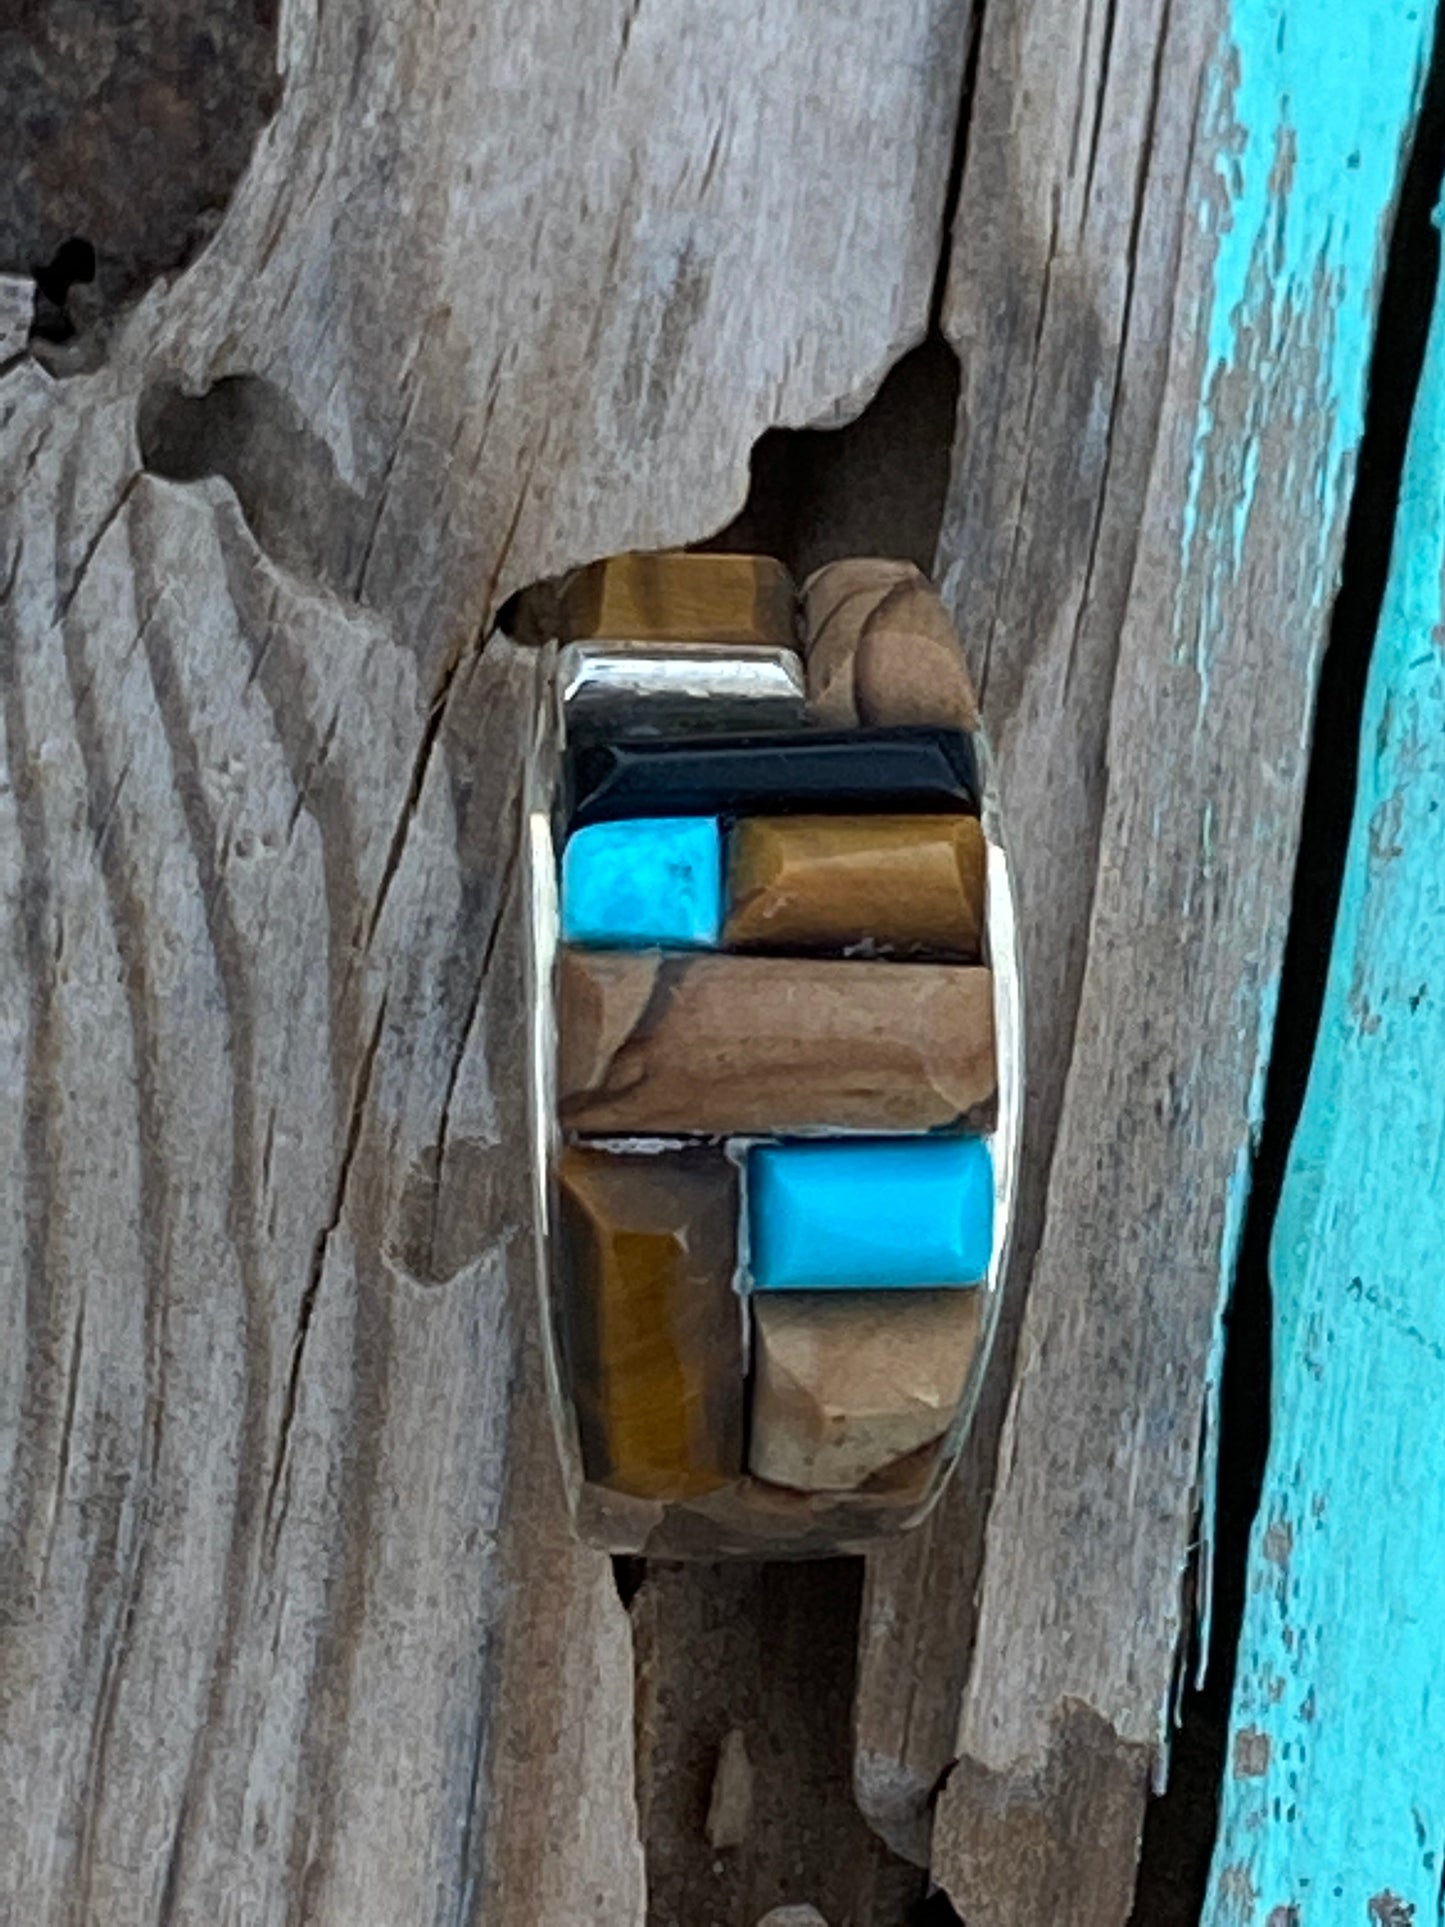 Navajo Turquoise Onyx, Petrified Wood & Sterling silver Ring